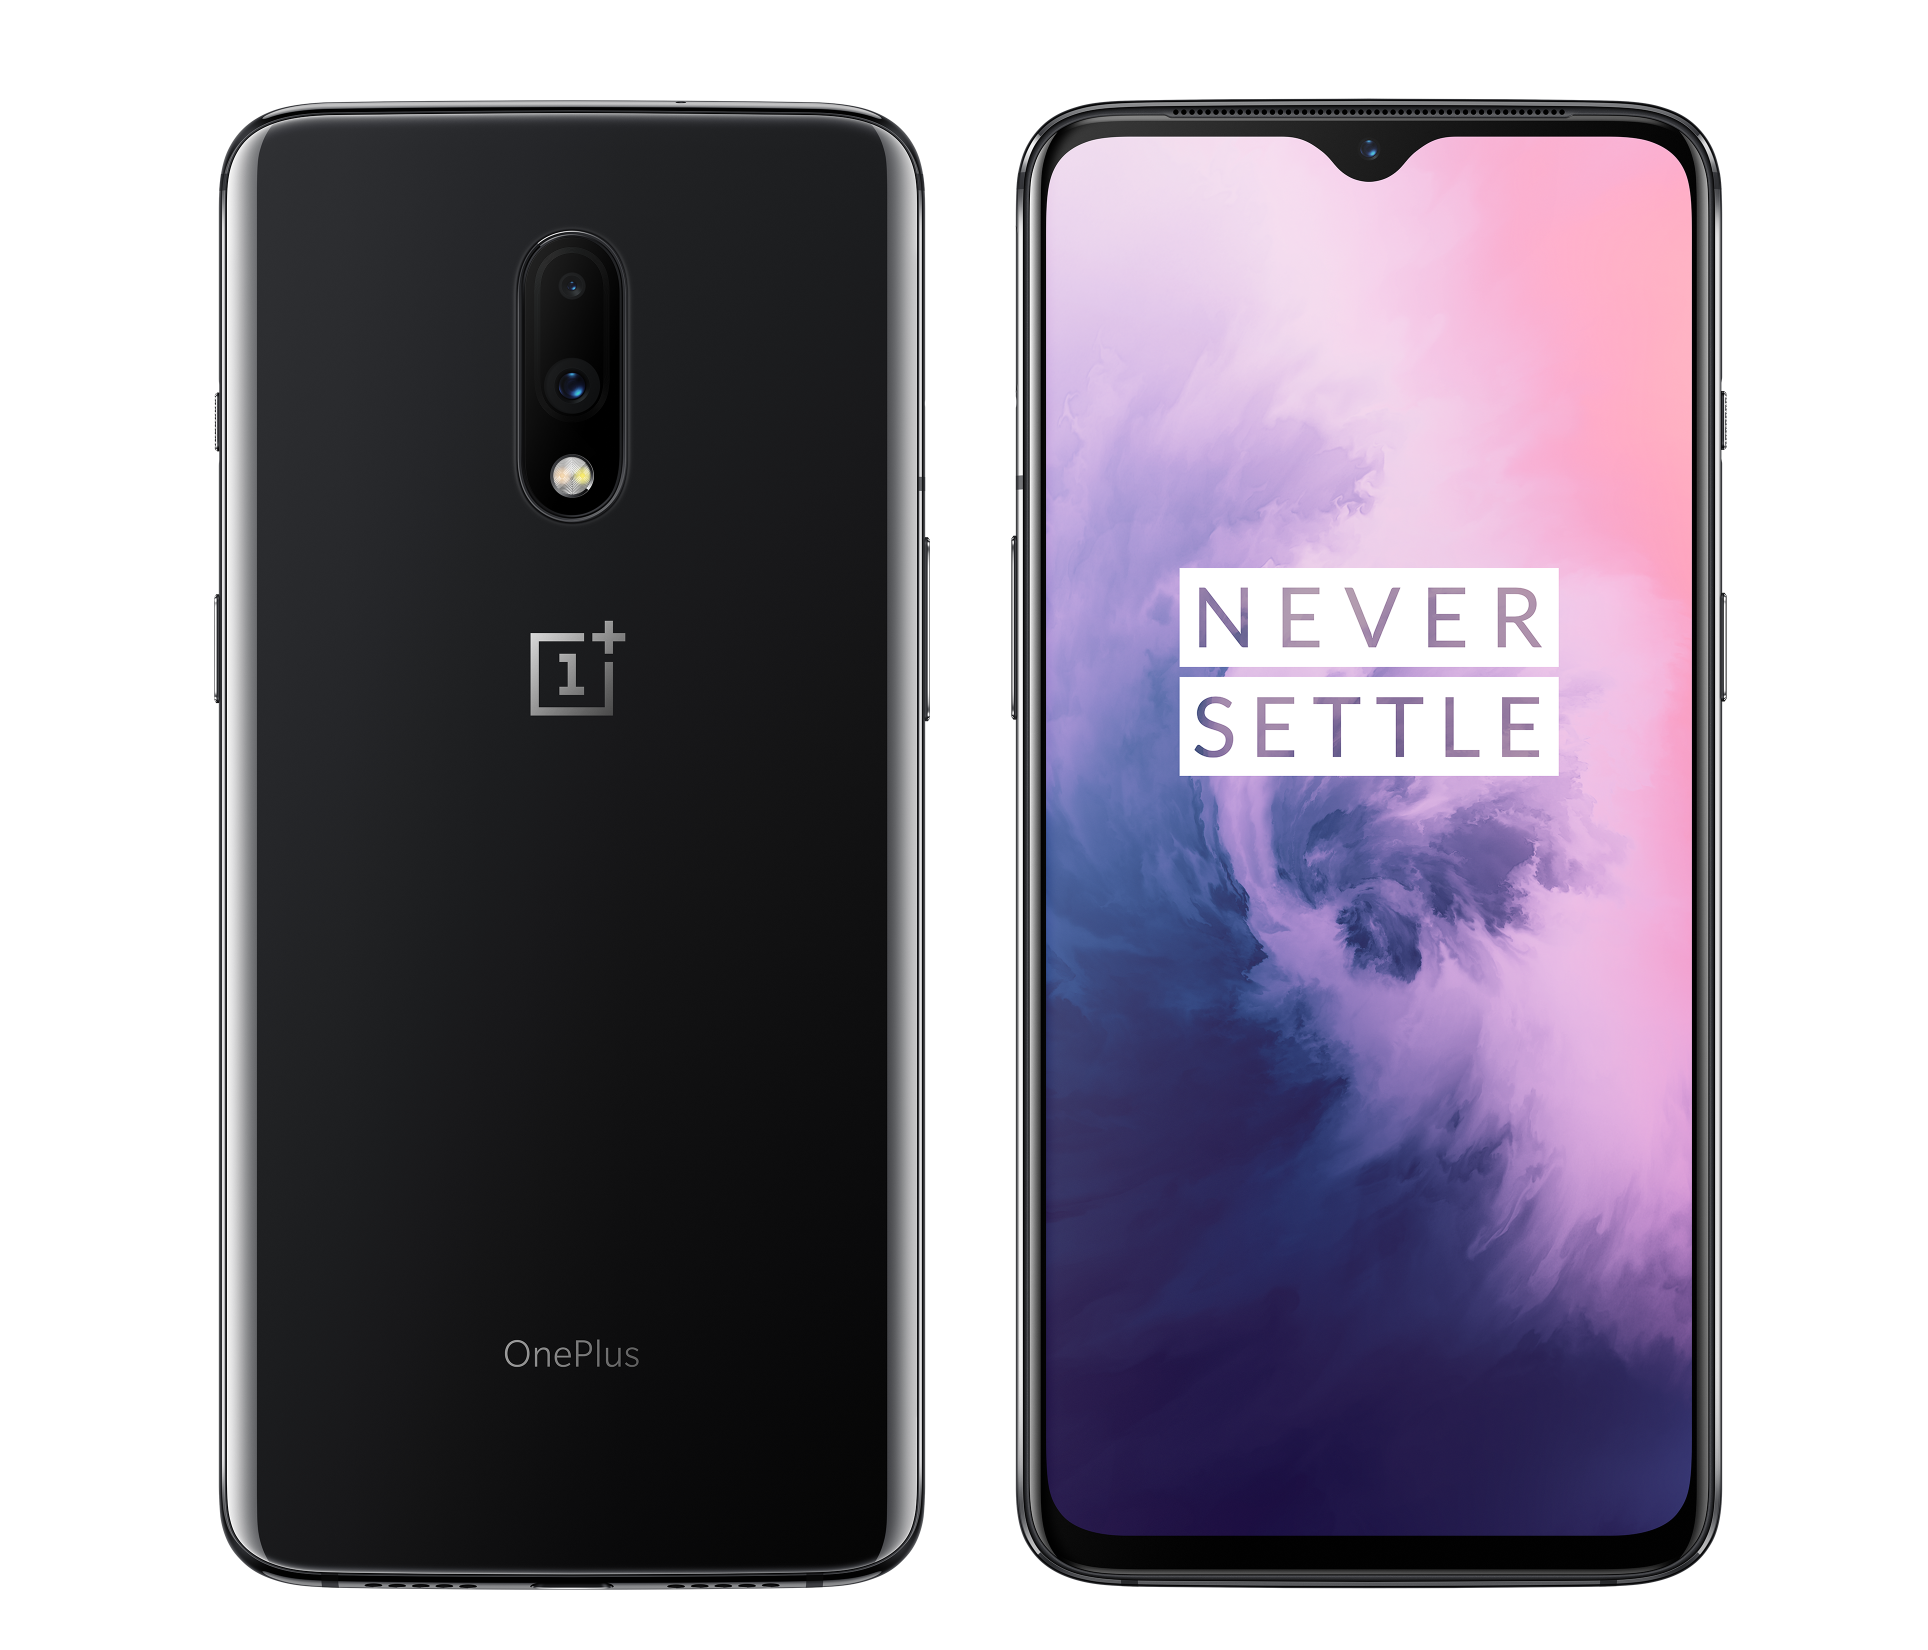 OnePlus Announces The OnePlus 7 & OnePlus 7 Pro: Upping The Ante